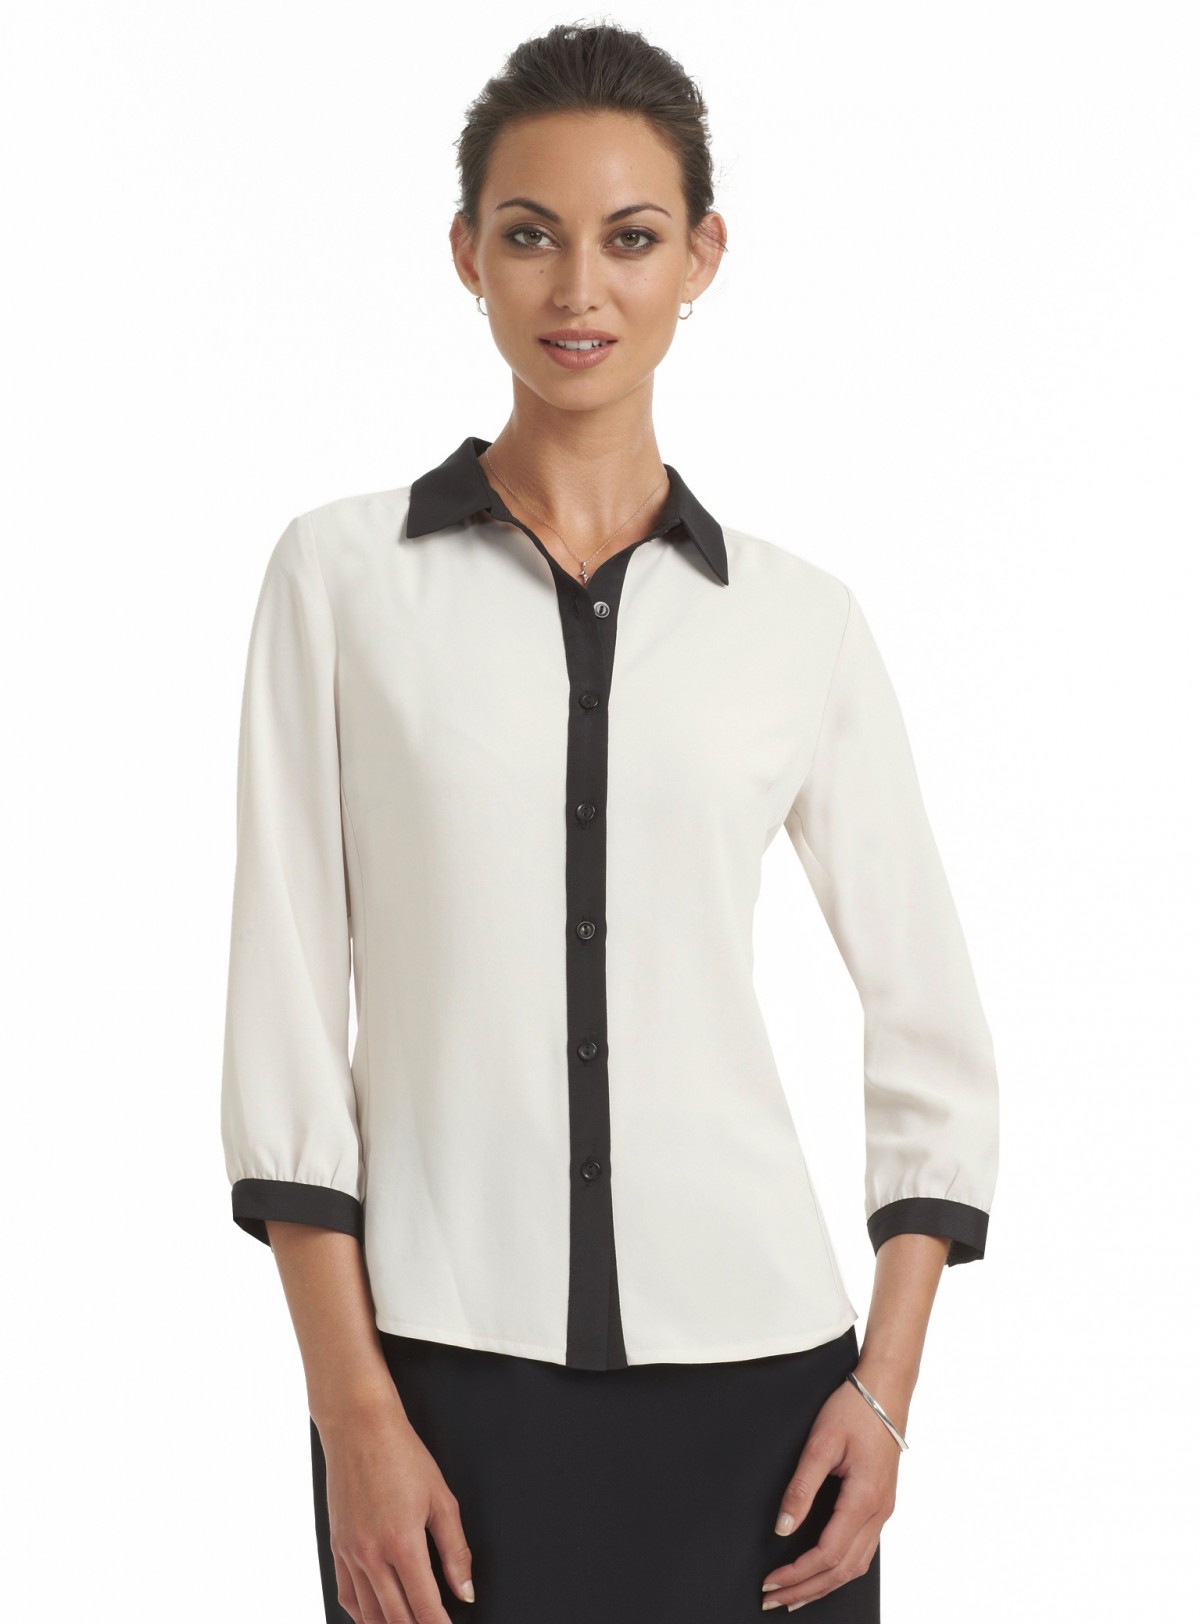 Buy 3/4 Sleeve Collared Blouse in NZ | The Uniform Centre